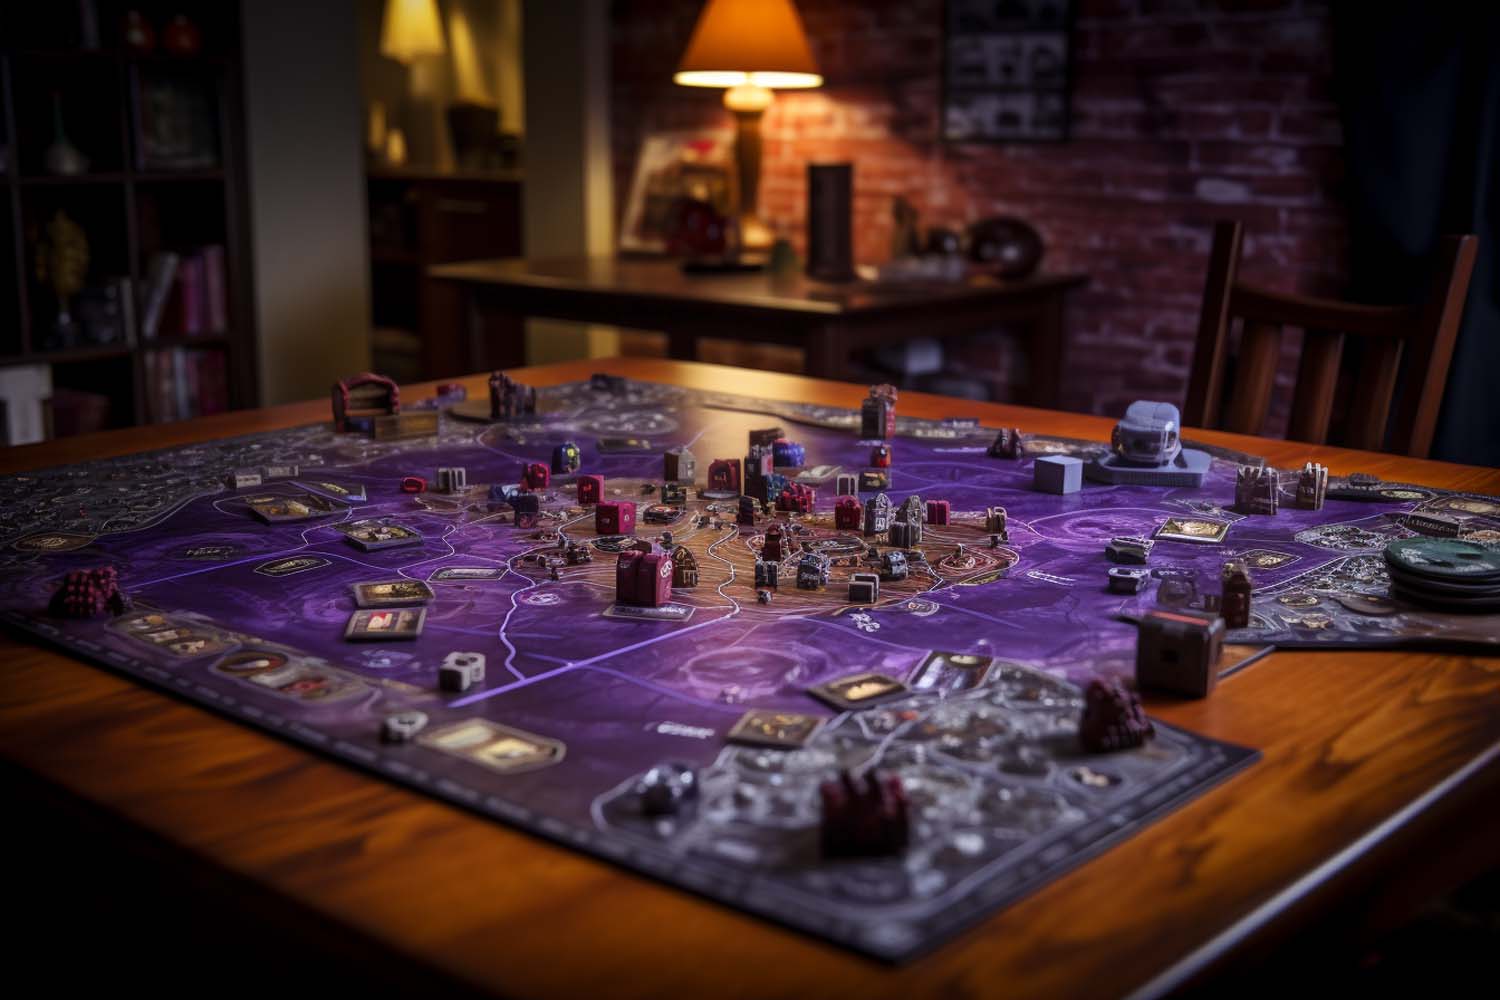 Board game table in the style of dark purple and brown, tilt-shift photography by Ted Tschopp